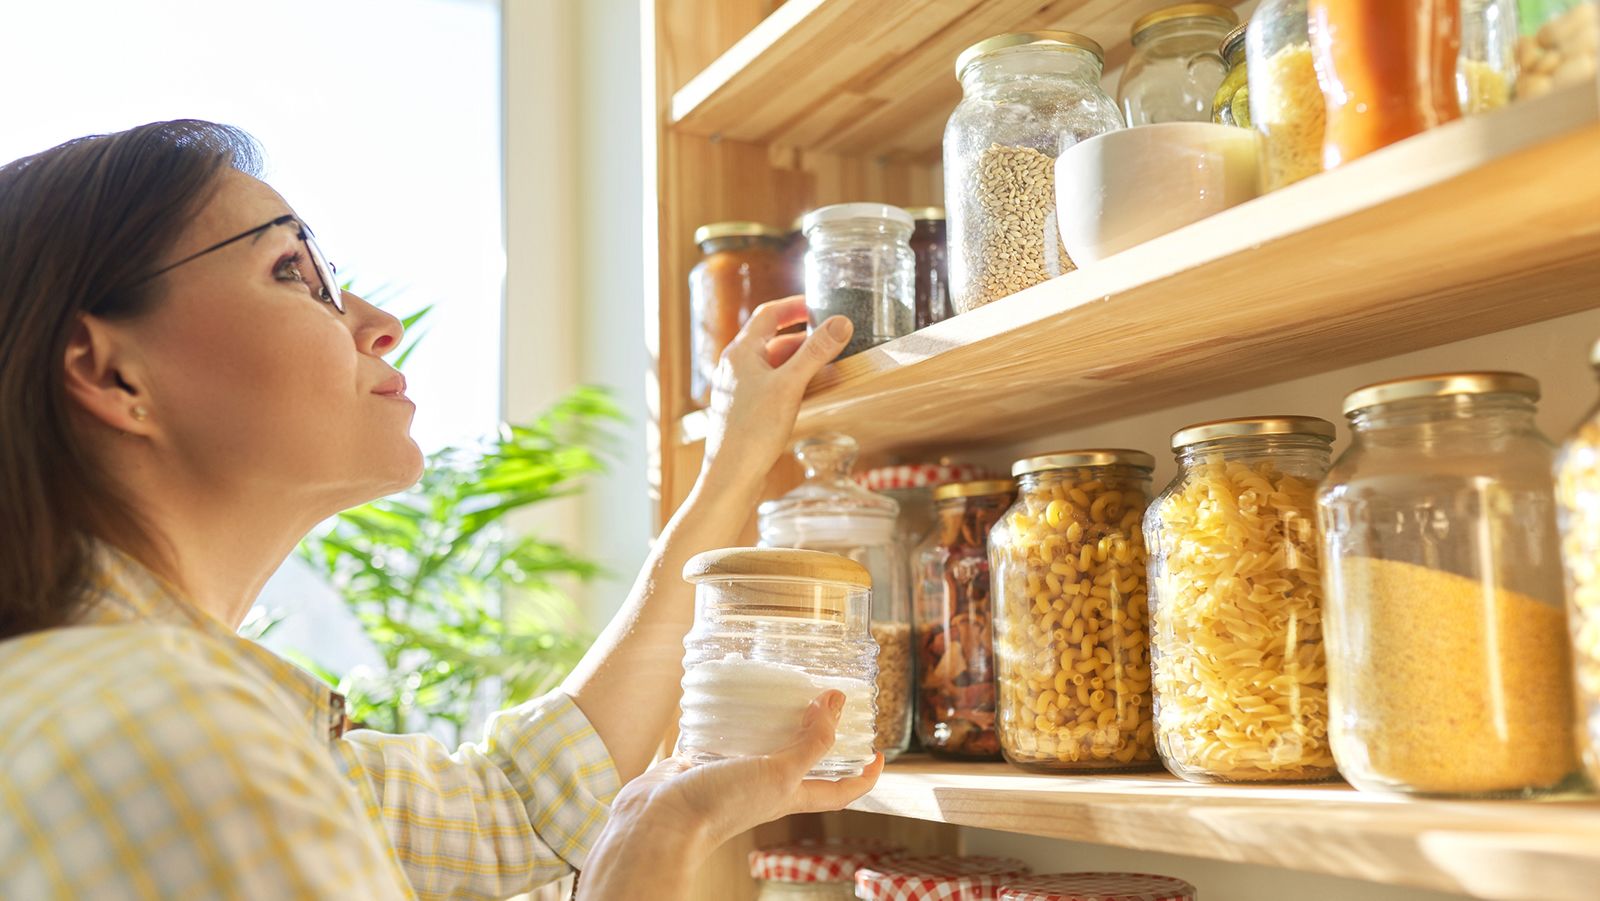 How To Organize A Small Pantry: 6 Professional Tips